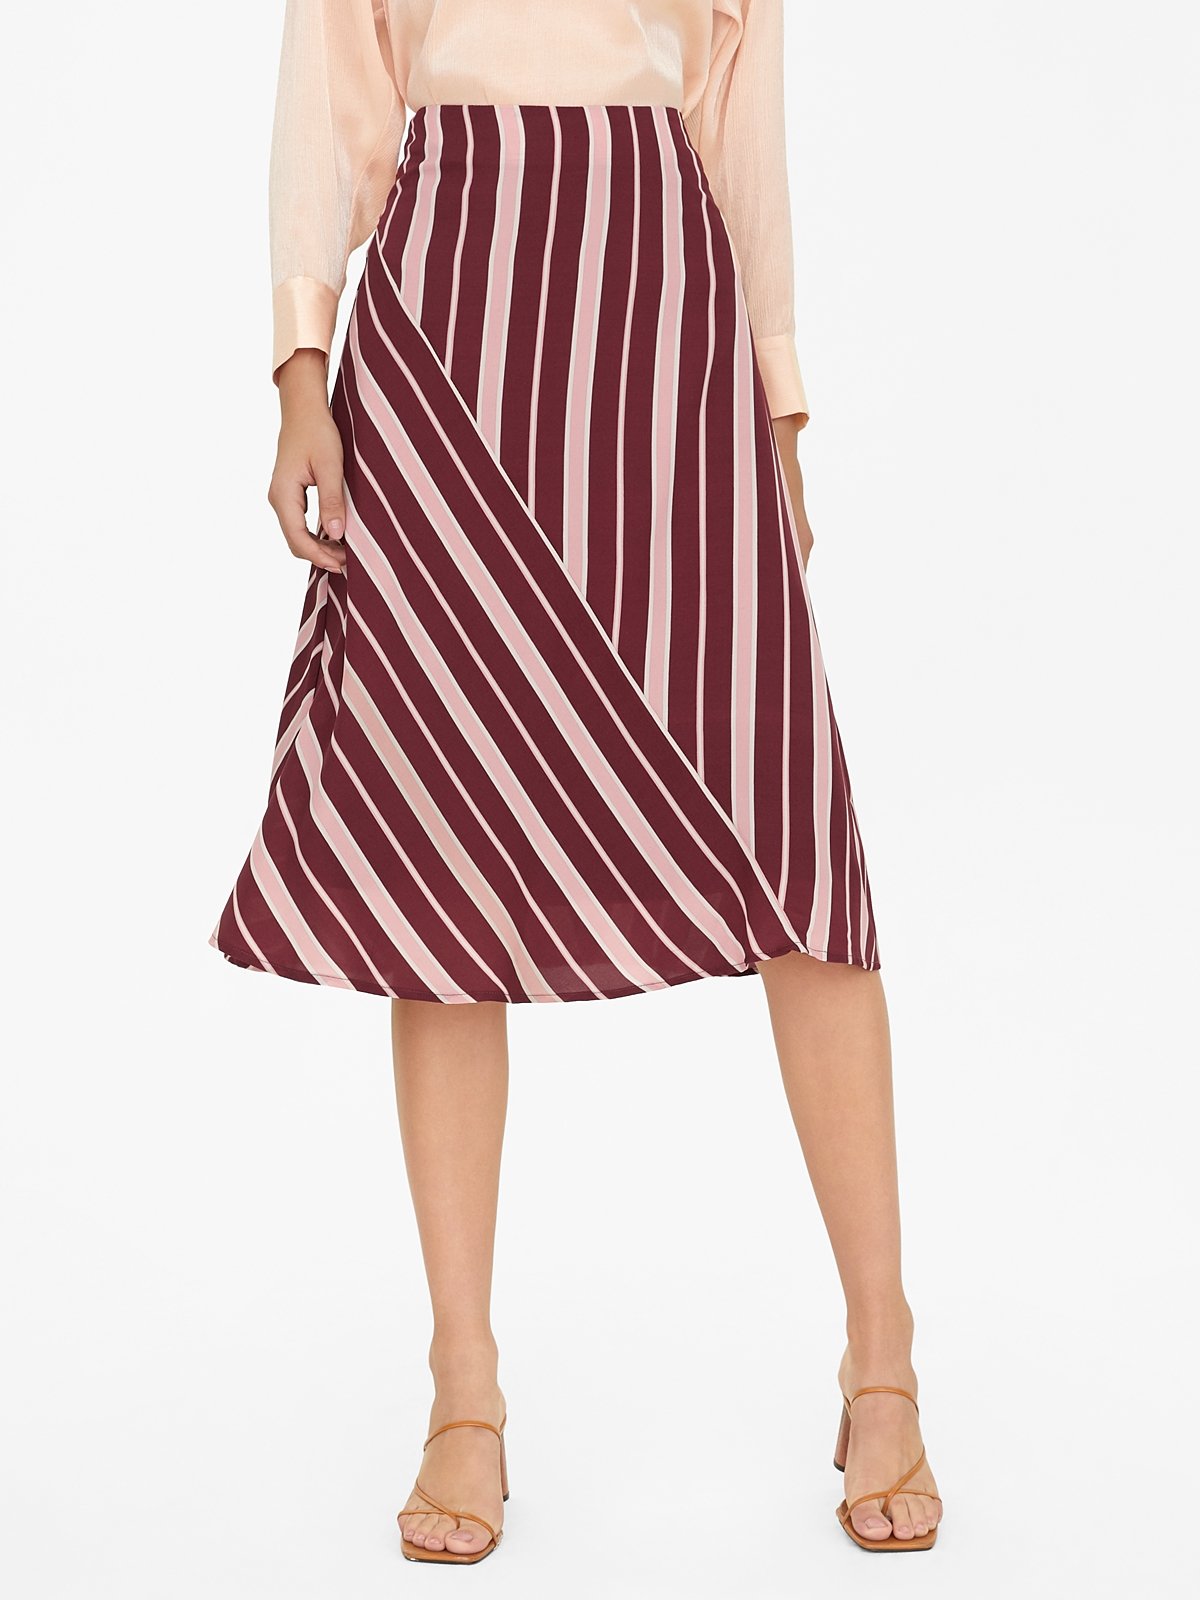 Striped Fit And Flare Skirt - Red - Pomelo Fashion